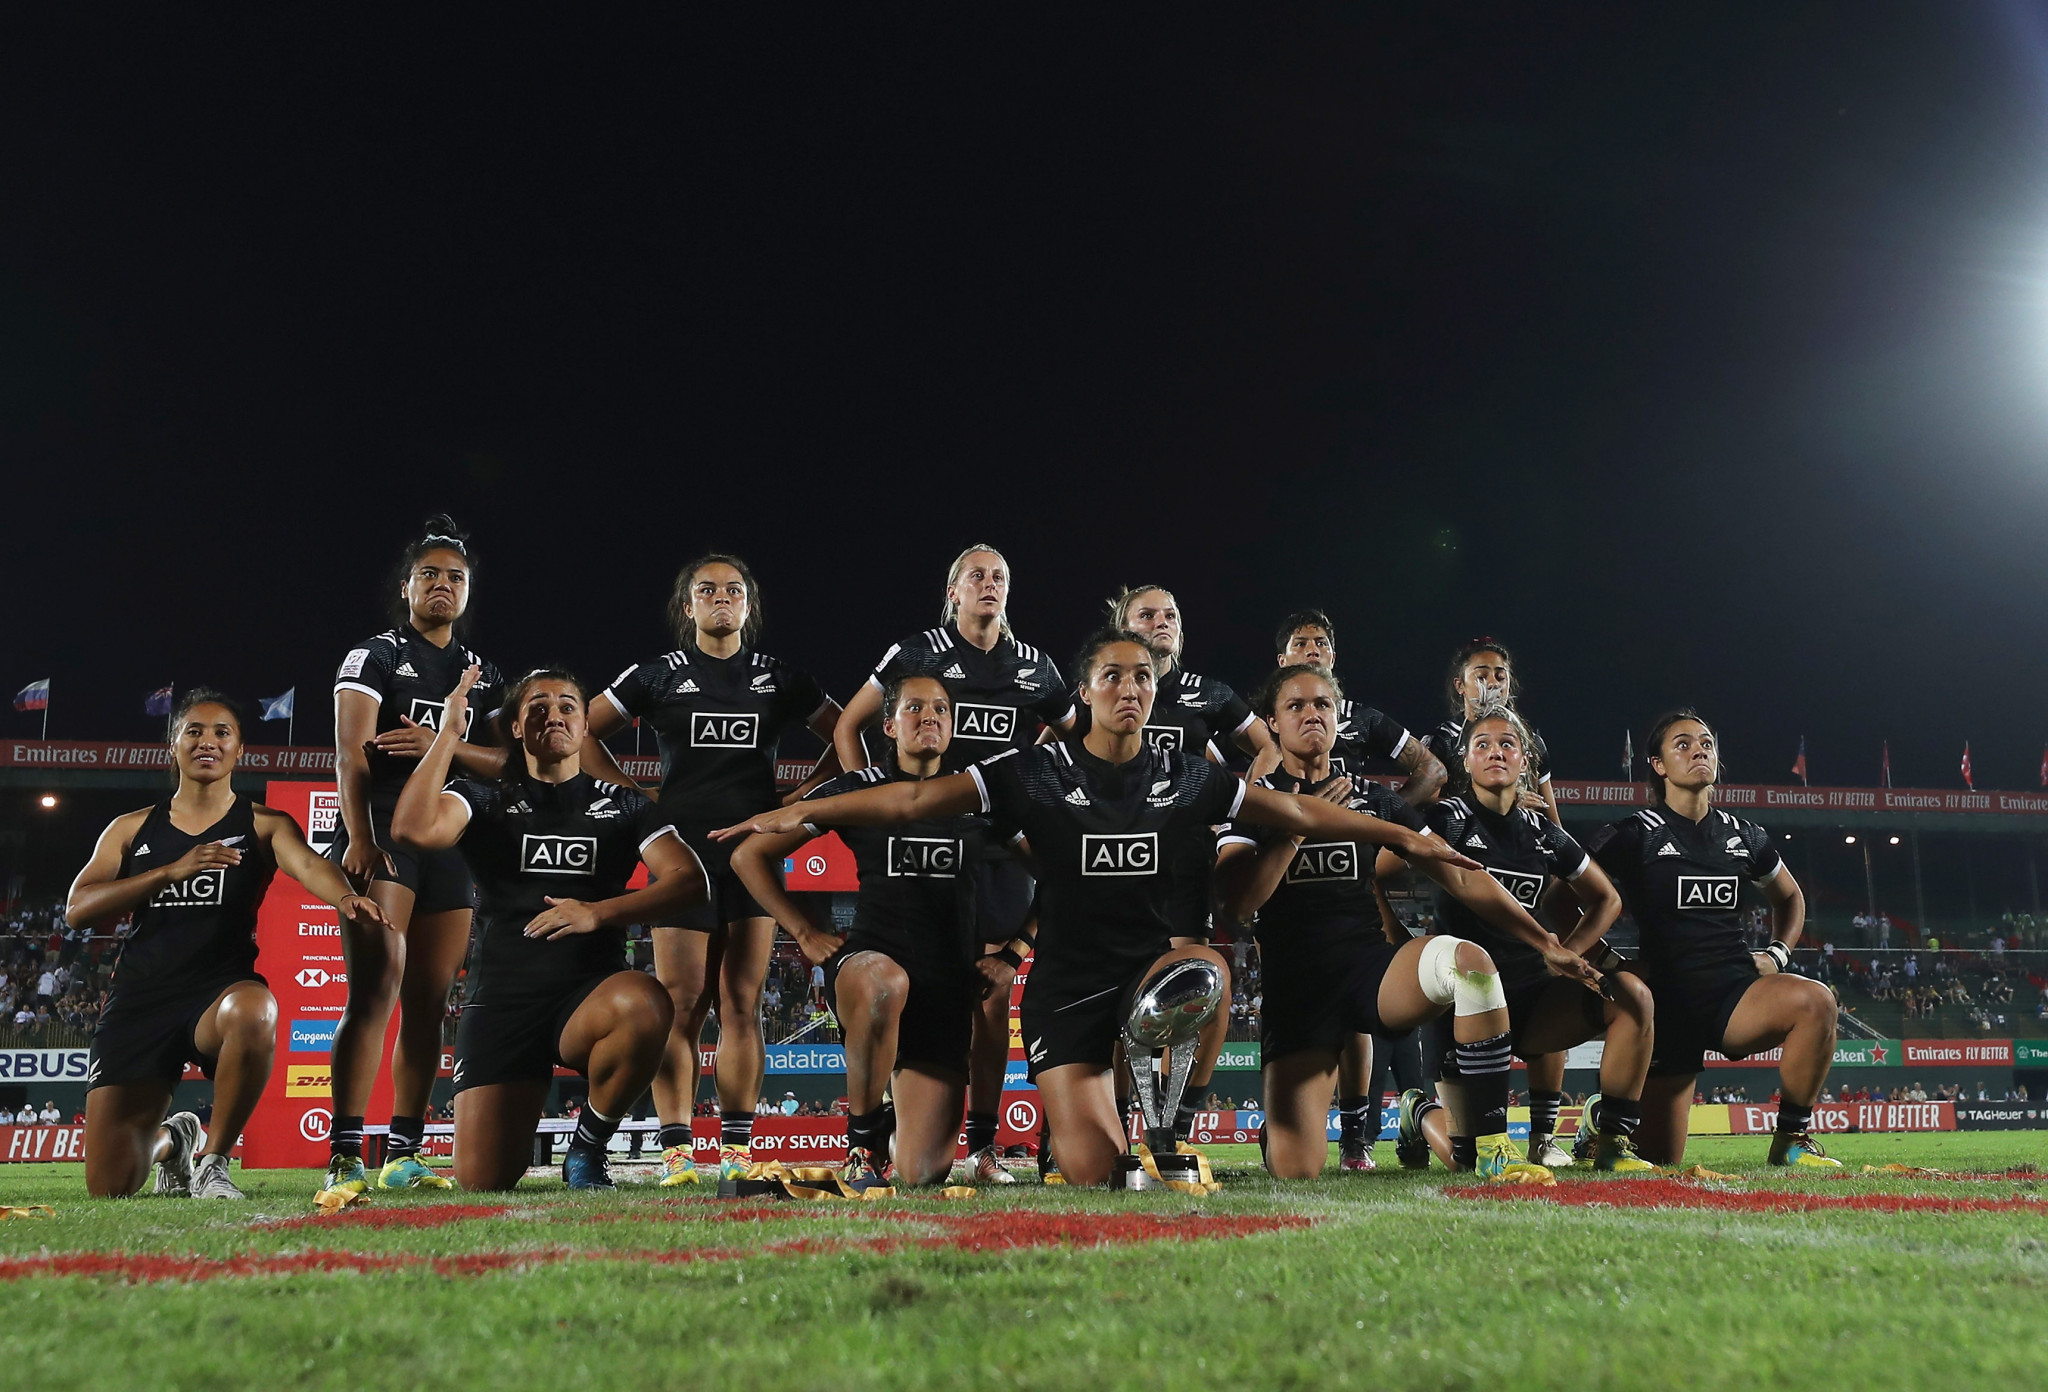 New Zealand perform their celebratory haka after winning the World Rugby Women's Sevens Series in Dubai ©World Rugby